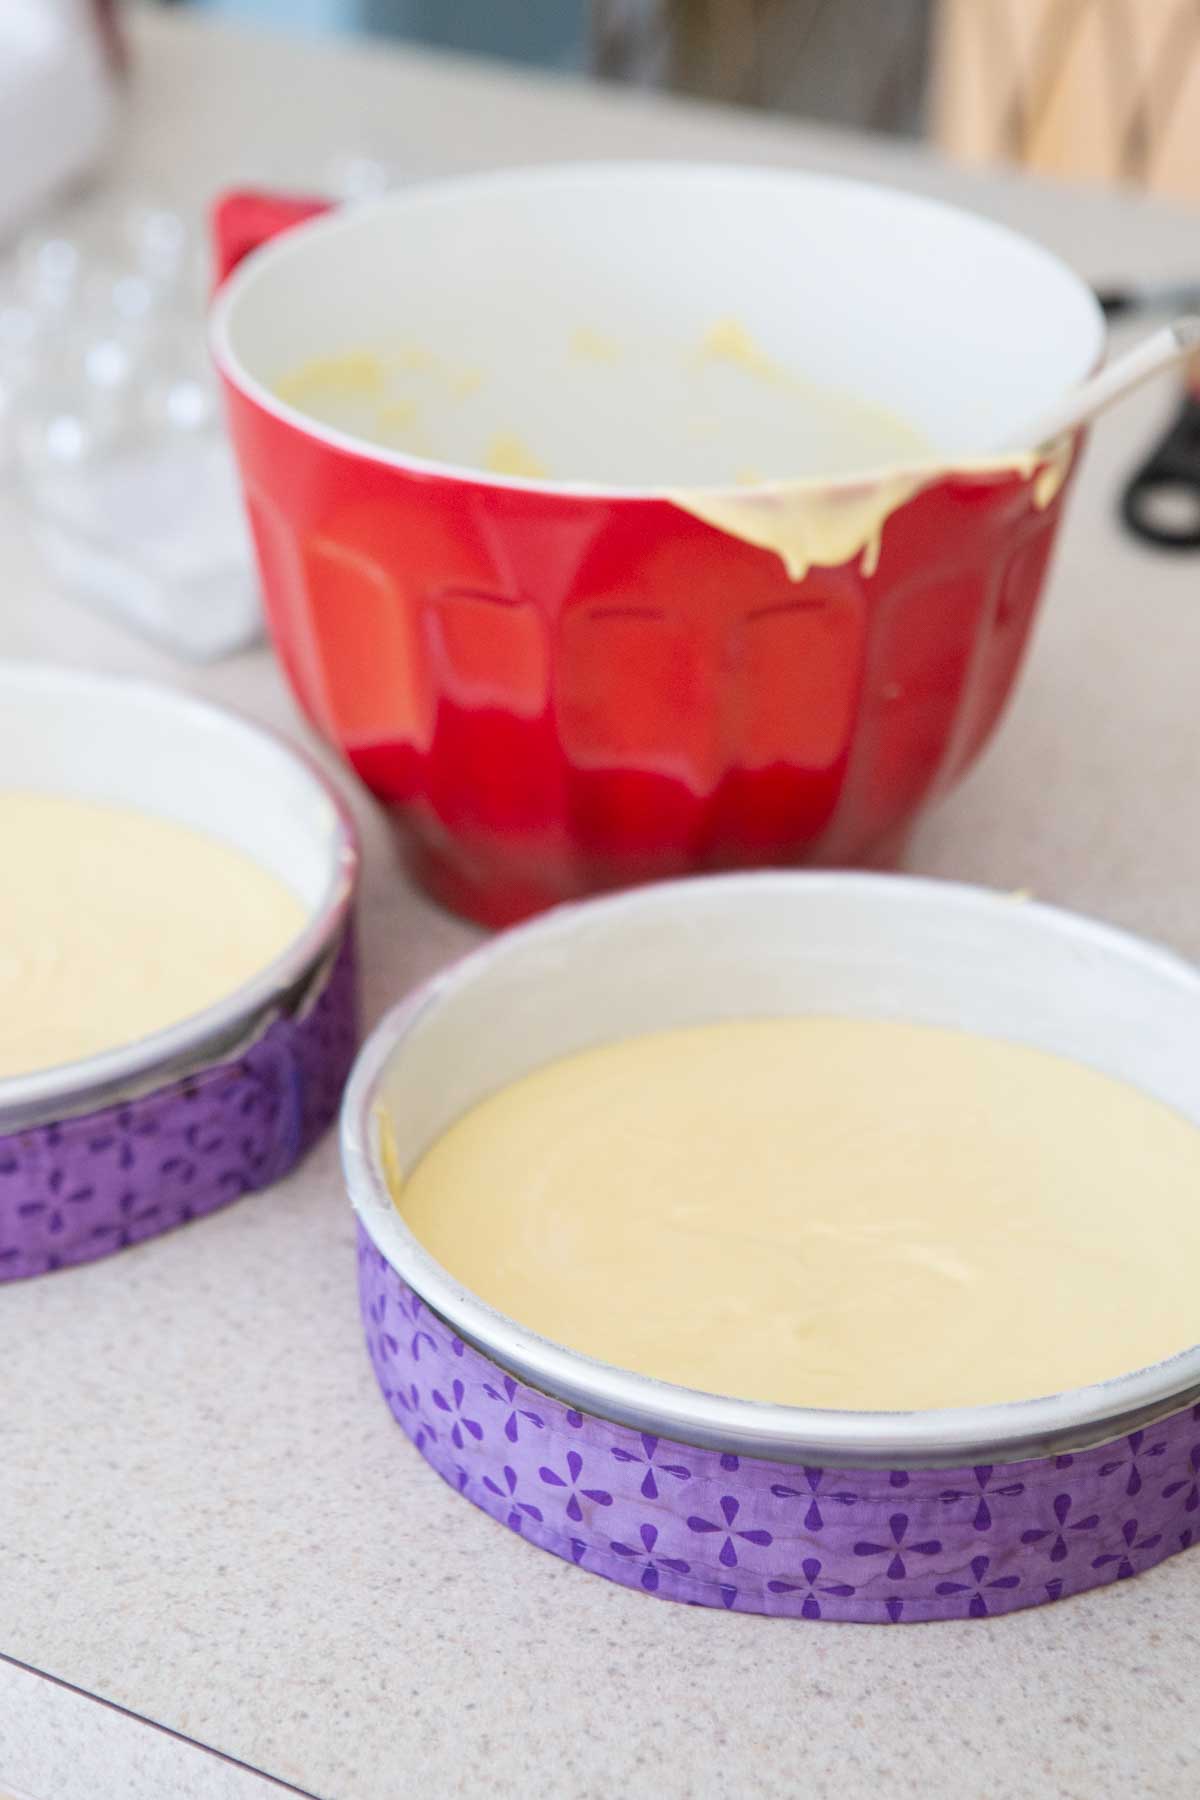 The cake pans have been wrapped in cake strips and the cake batter has been poured inside.